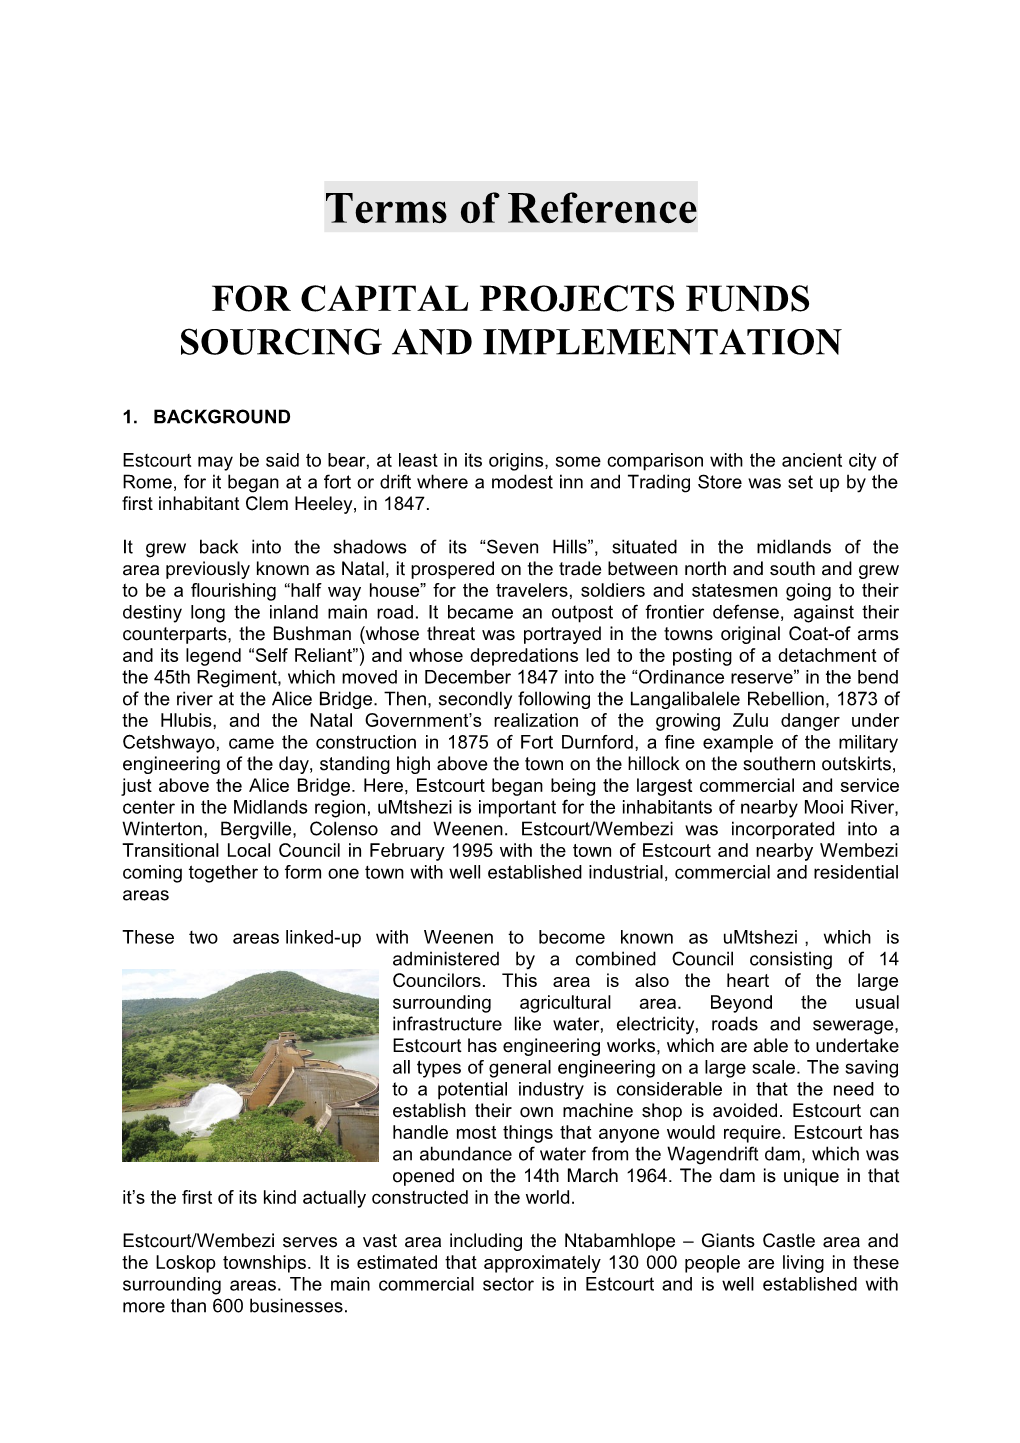 For Capital Projects Funds Sourcing and Implementation